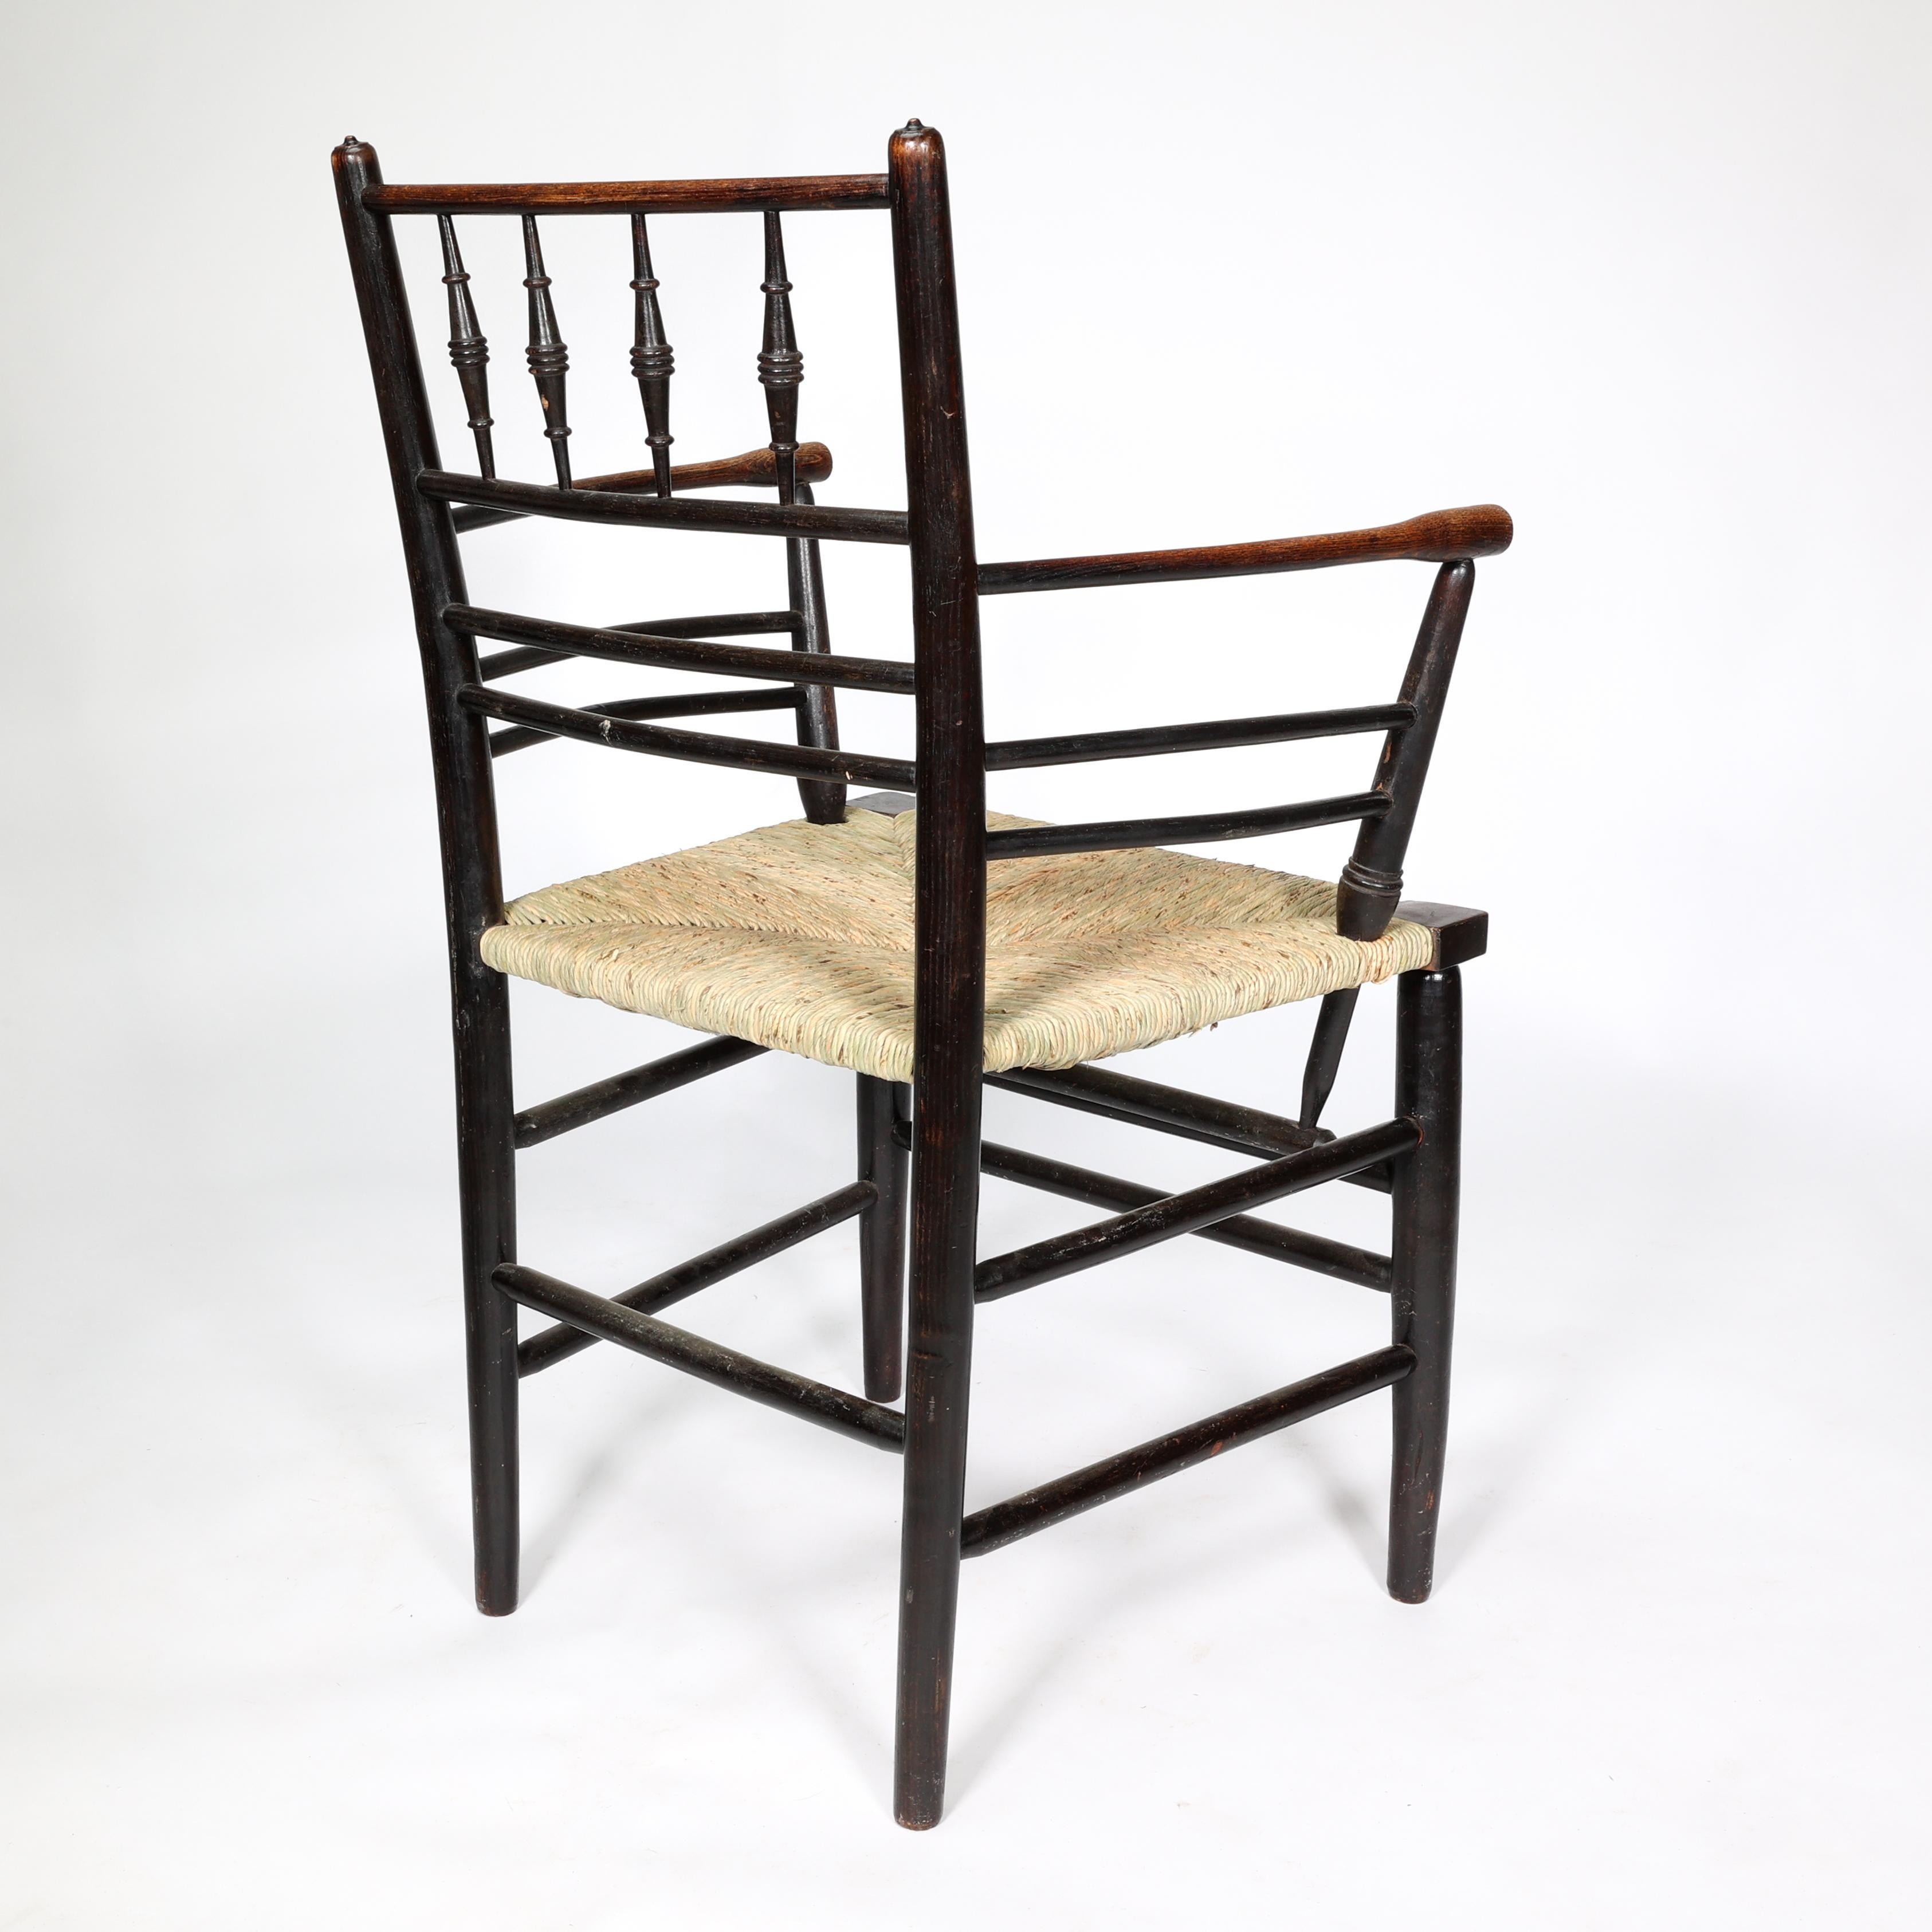 William Morris, A Classic Arts & Crafts Ebonised Armchair from the Sussex Range. 8